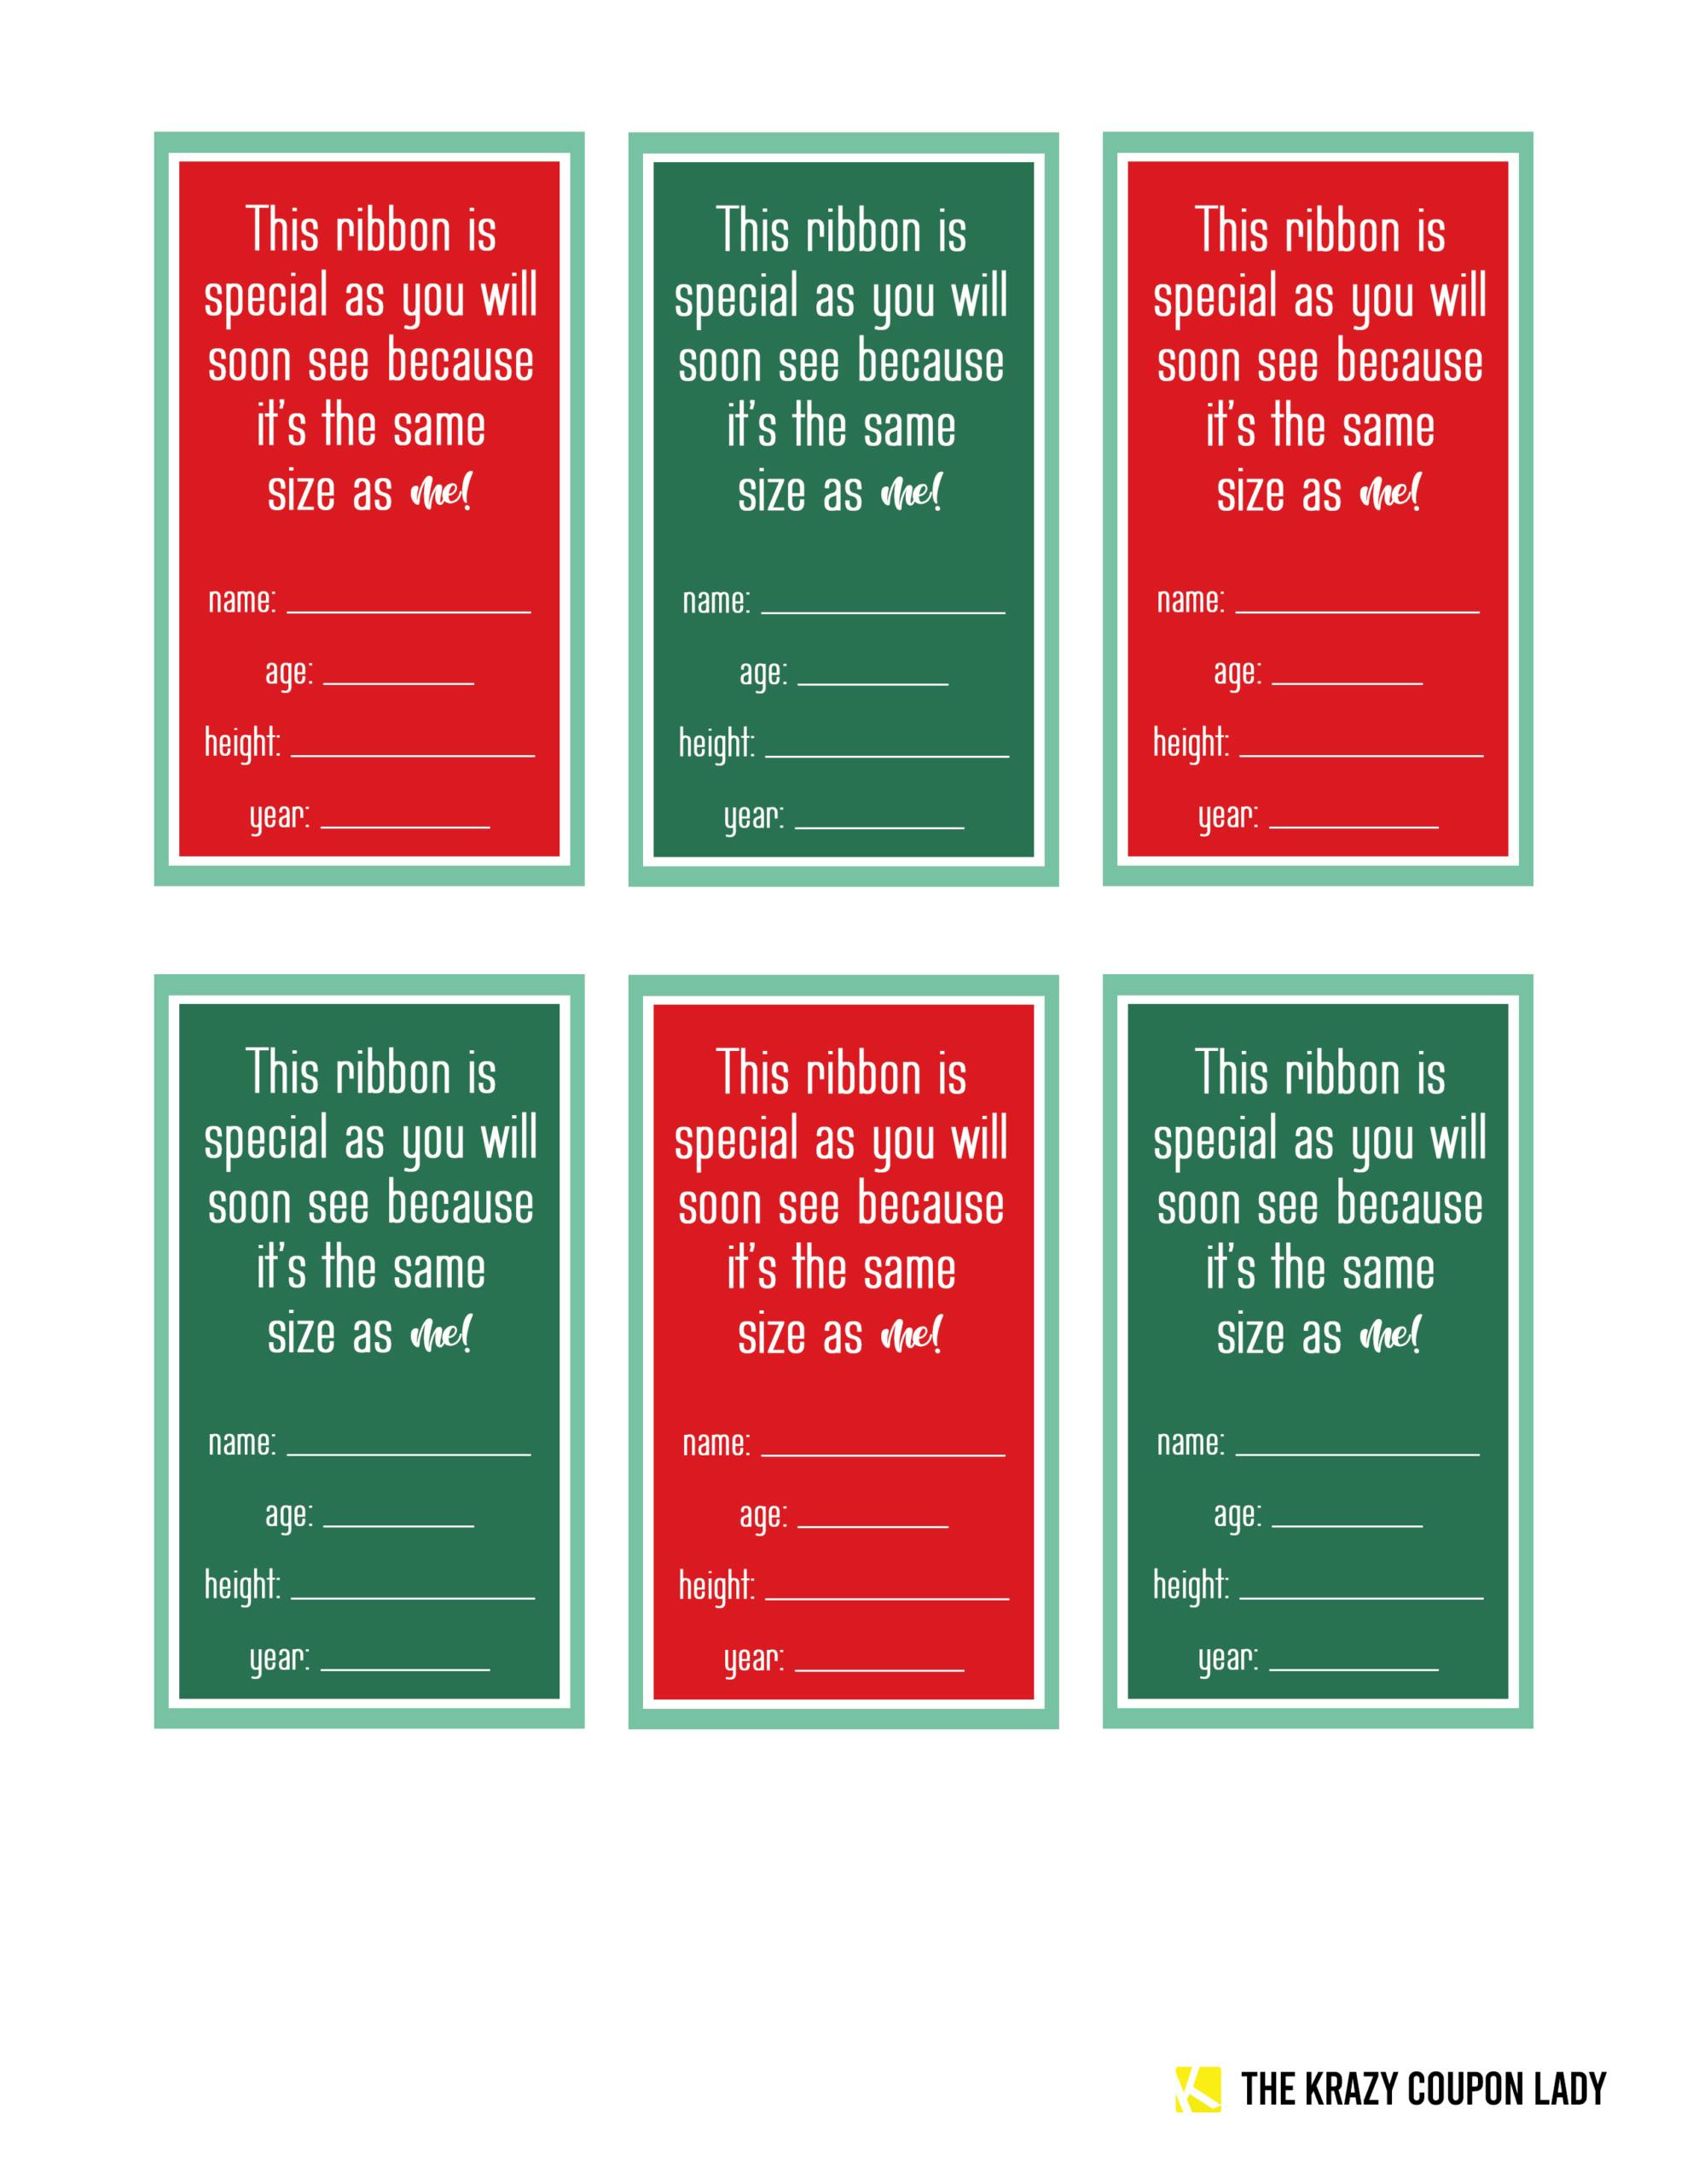 Christmas ornament print outs that read, "This ribbon is special, as you will soon see because its the same size as me!" with lines for the year, and the child's name, age, and height